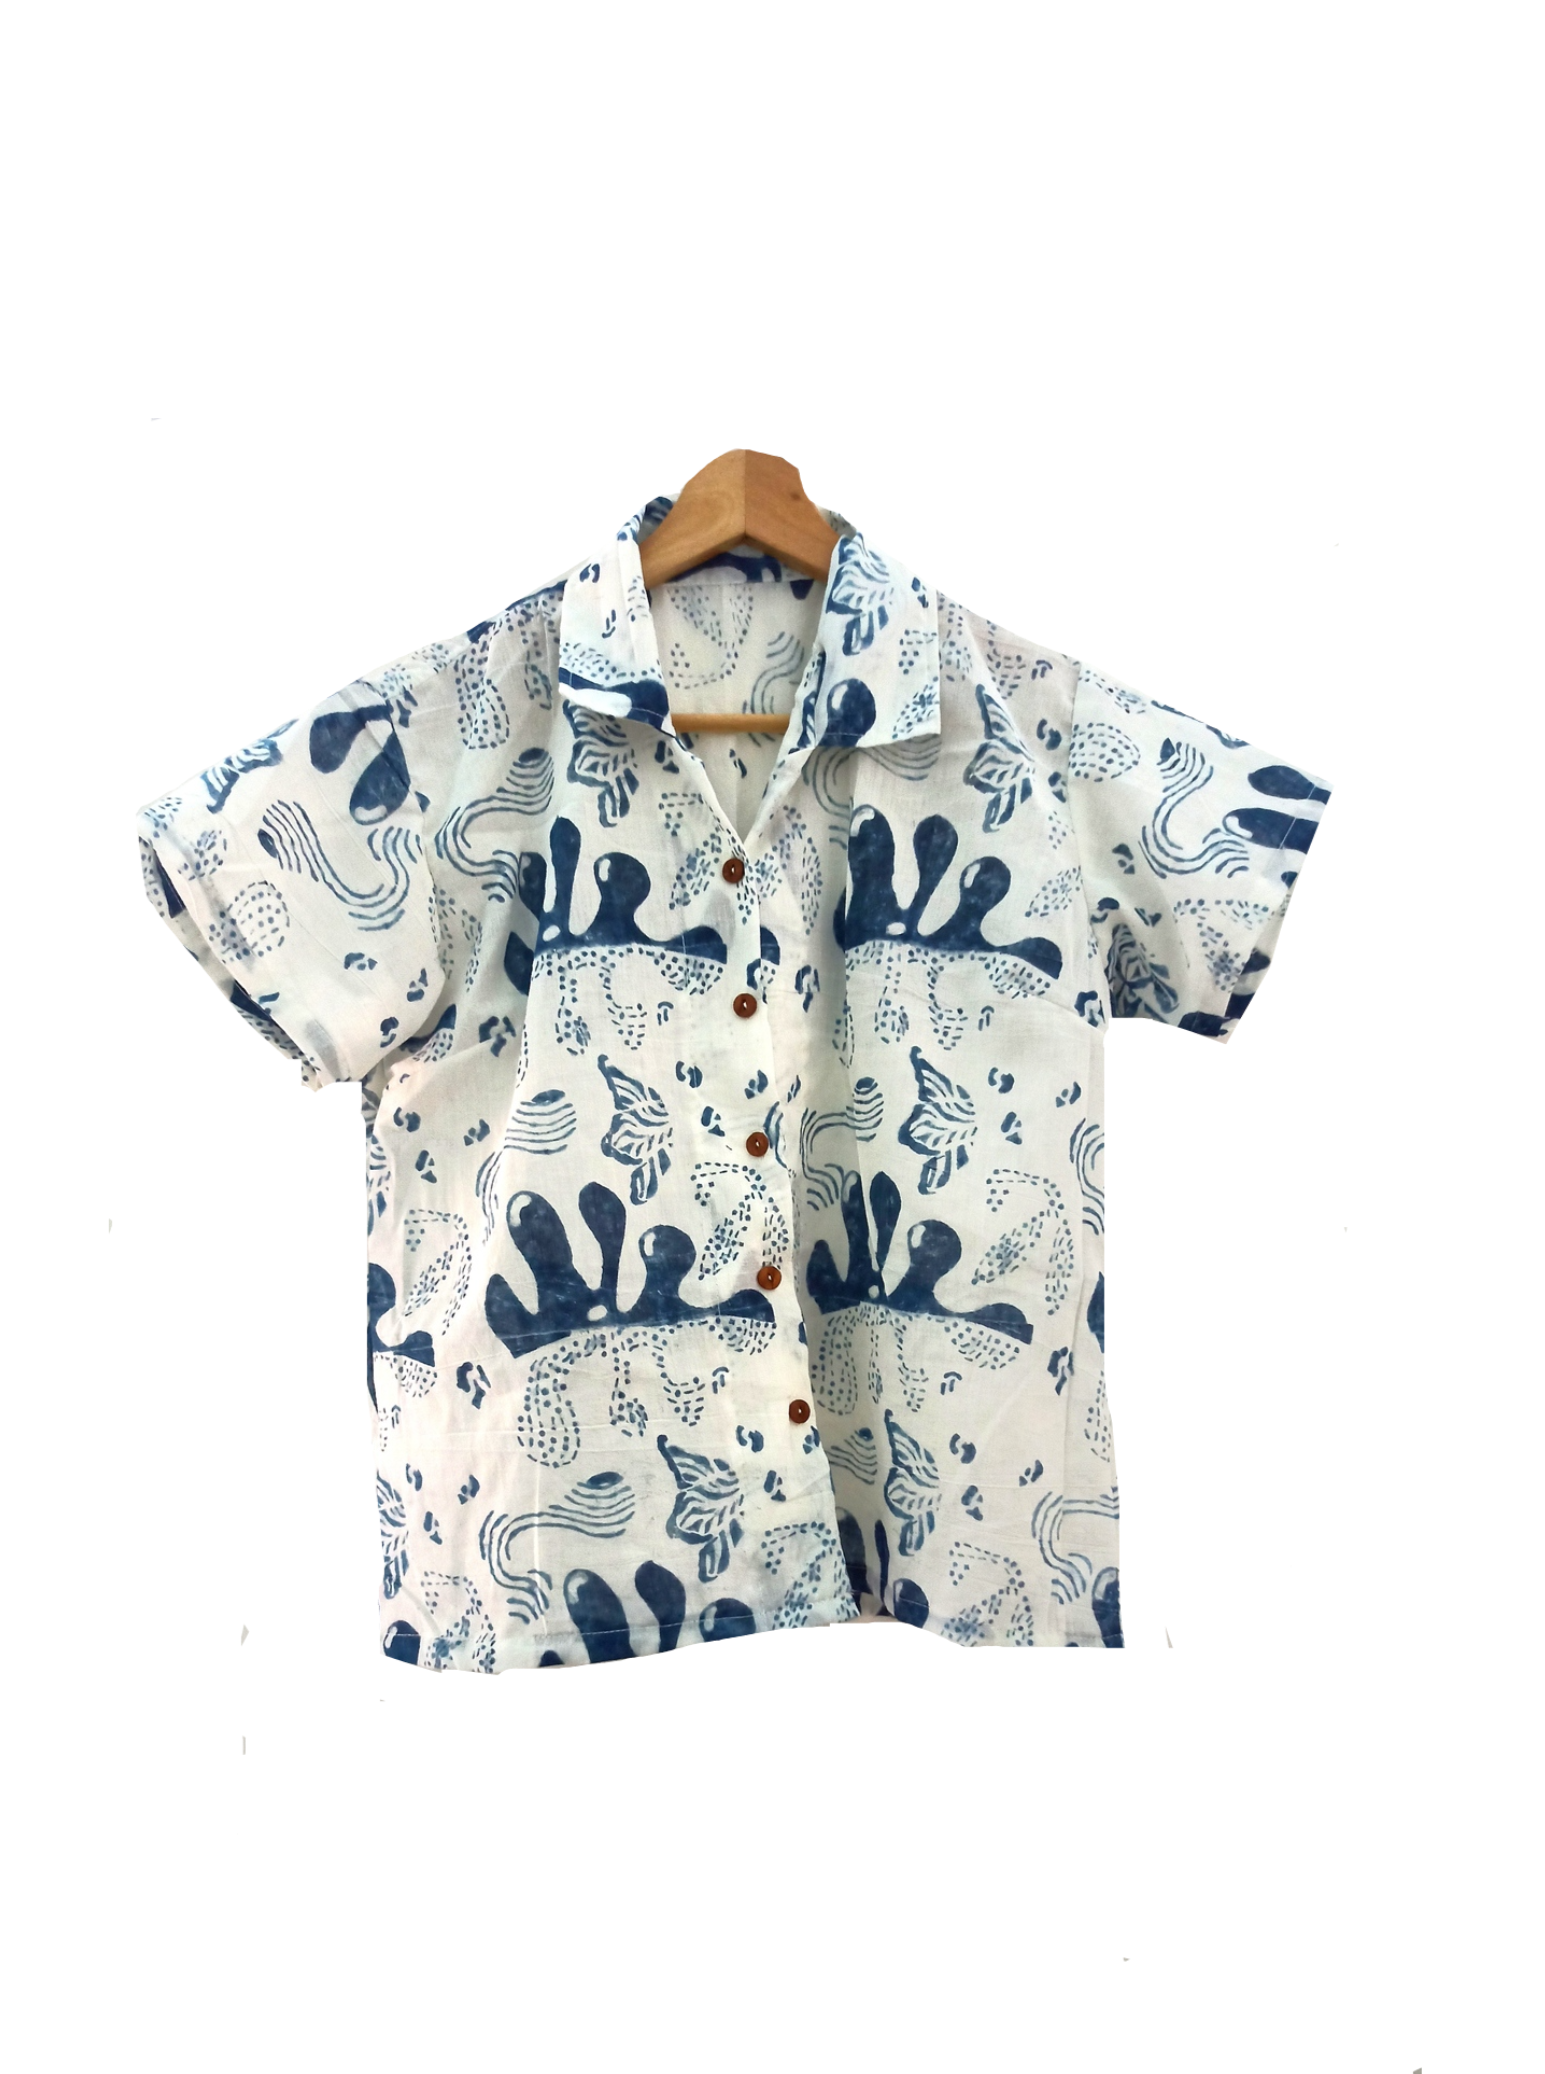 Morse code cropped shirt in Indigo (Size M & L) - One piece available